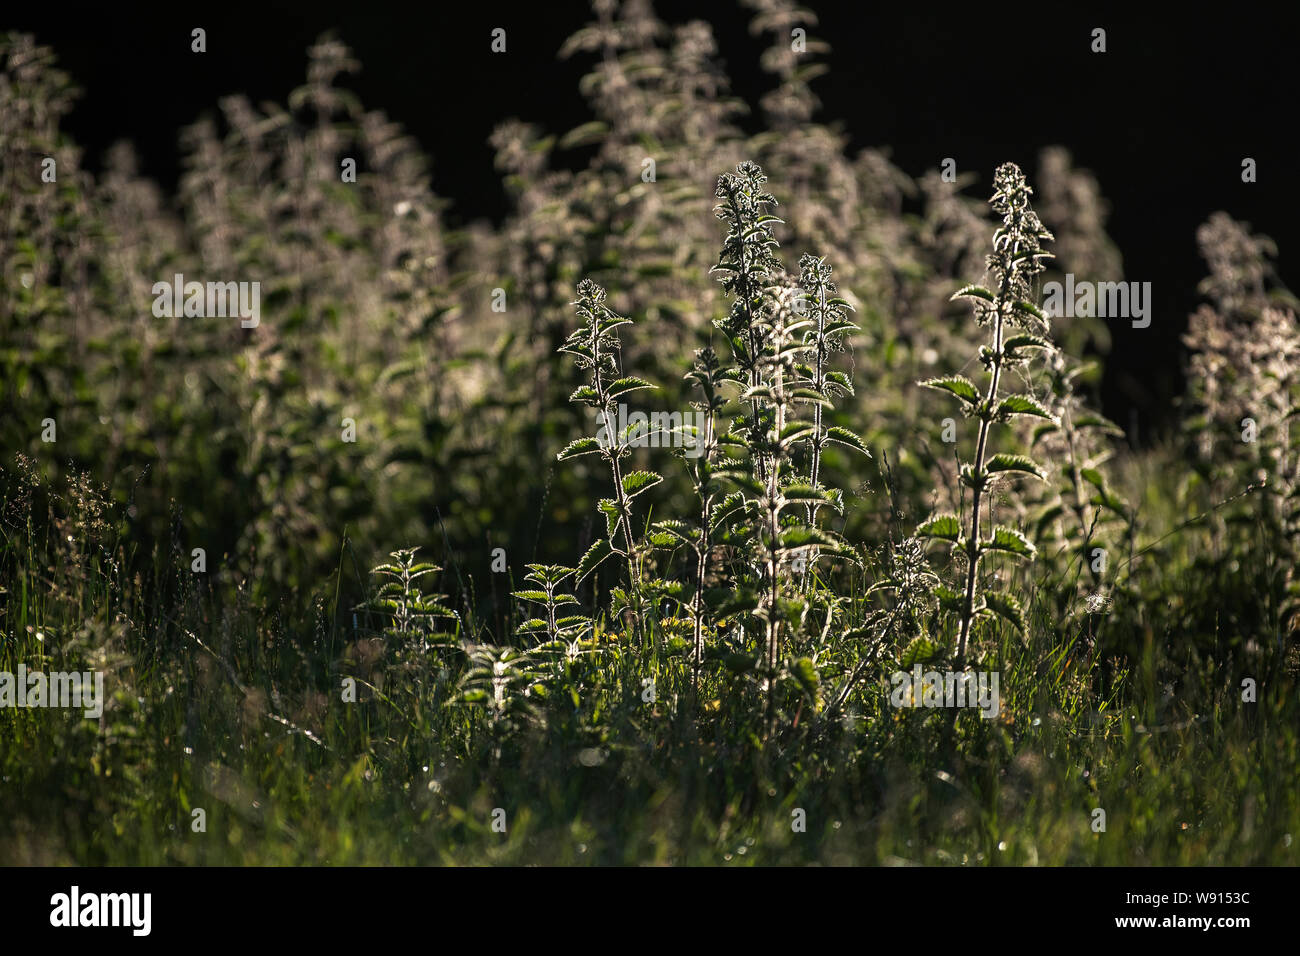 Backlit nettles, Urtica dioica, in early summer. UK. Stock Photo